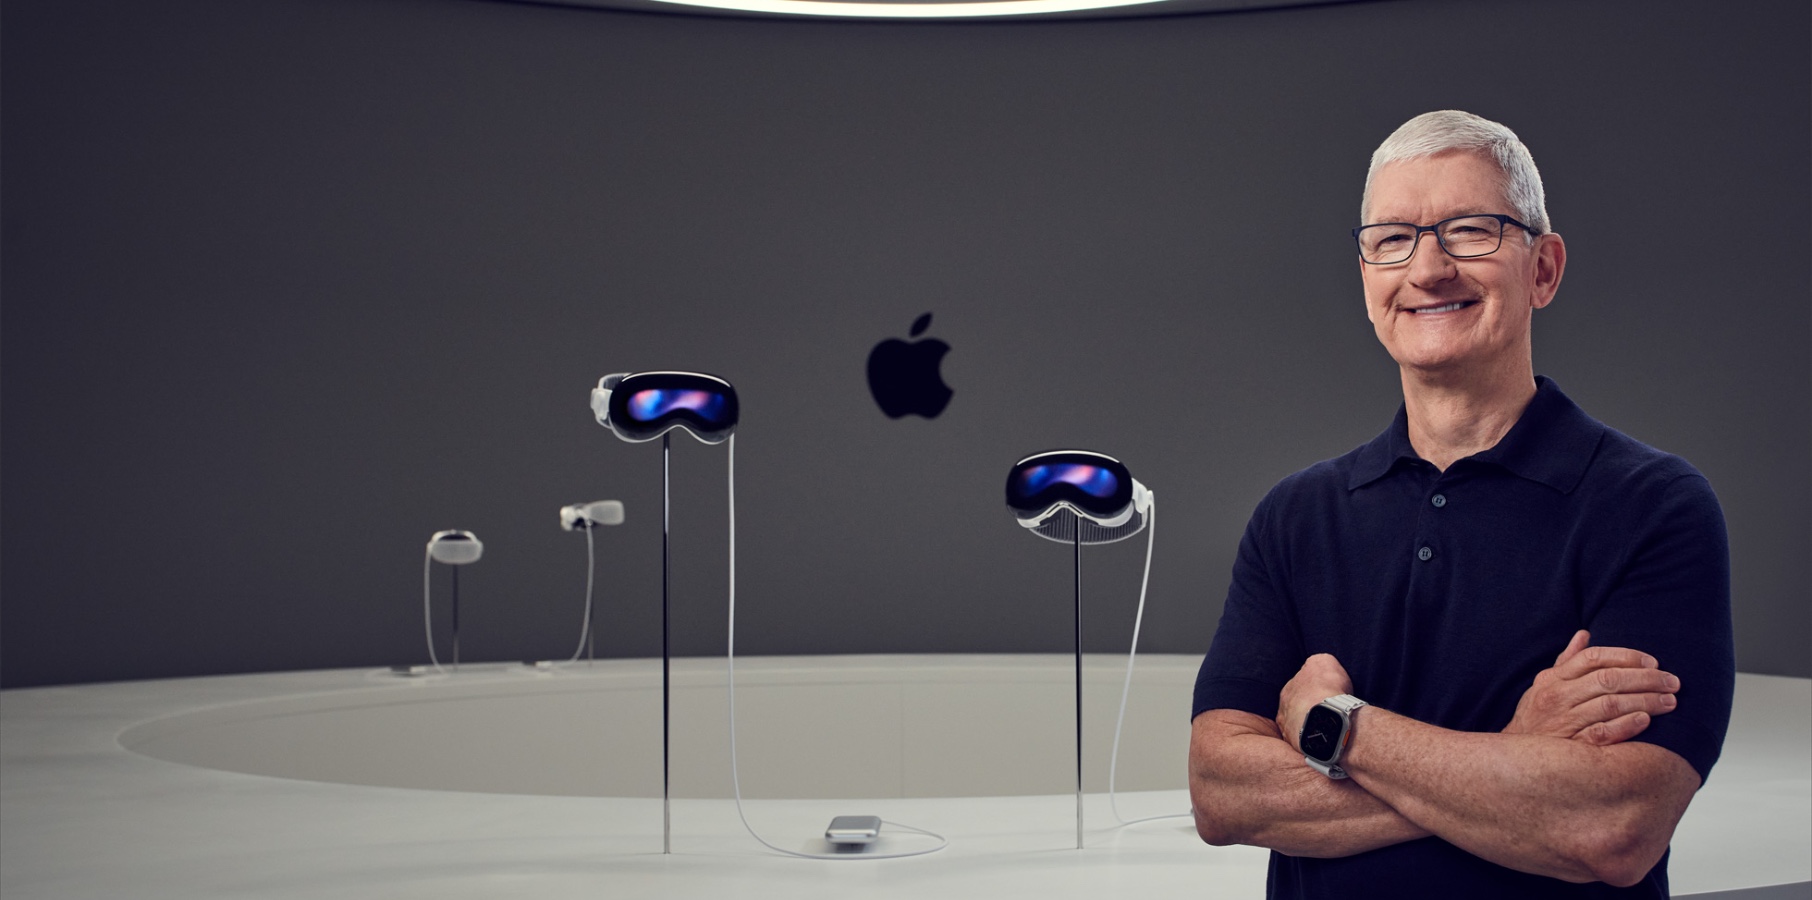 Tim Cook on Apple Vision Pro: "I've known we would get here"